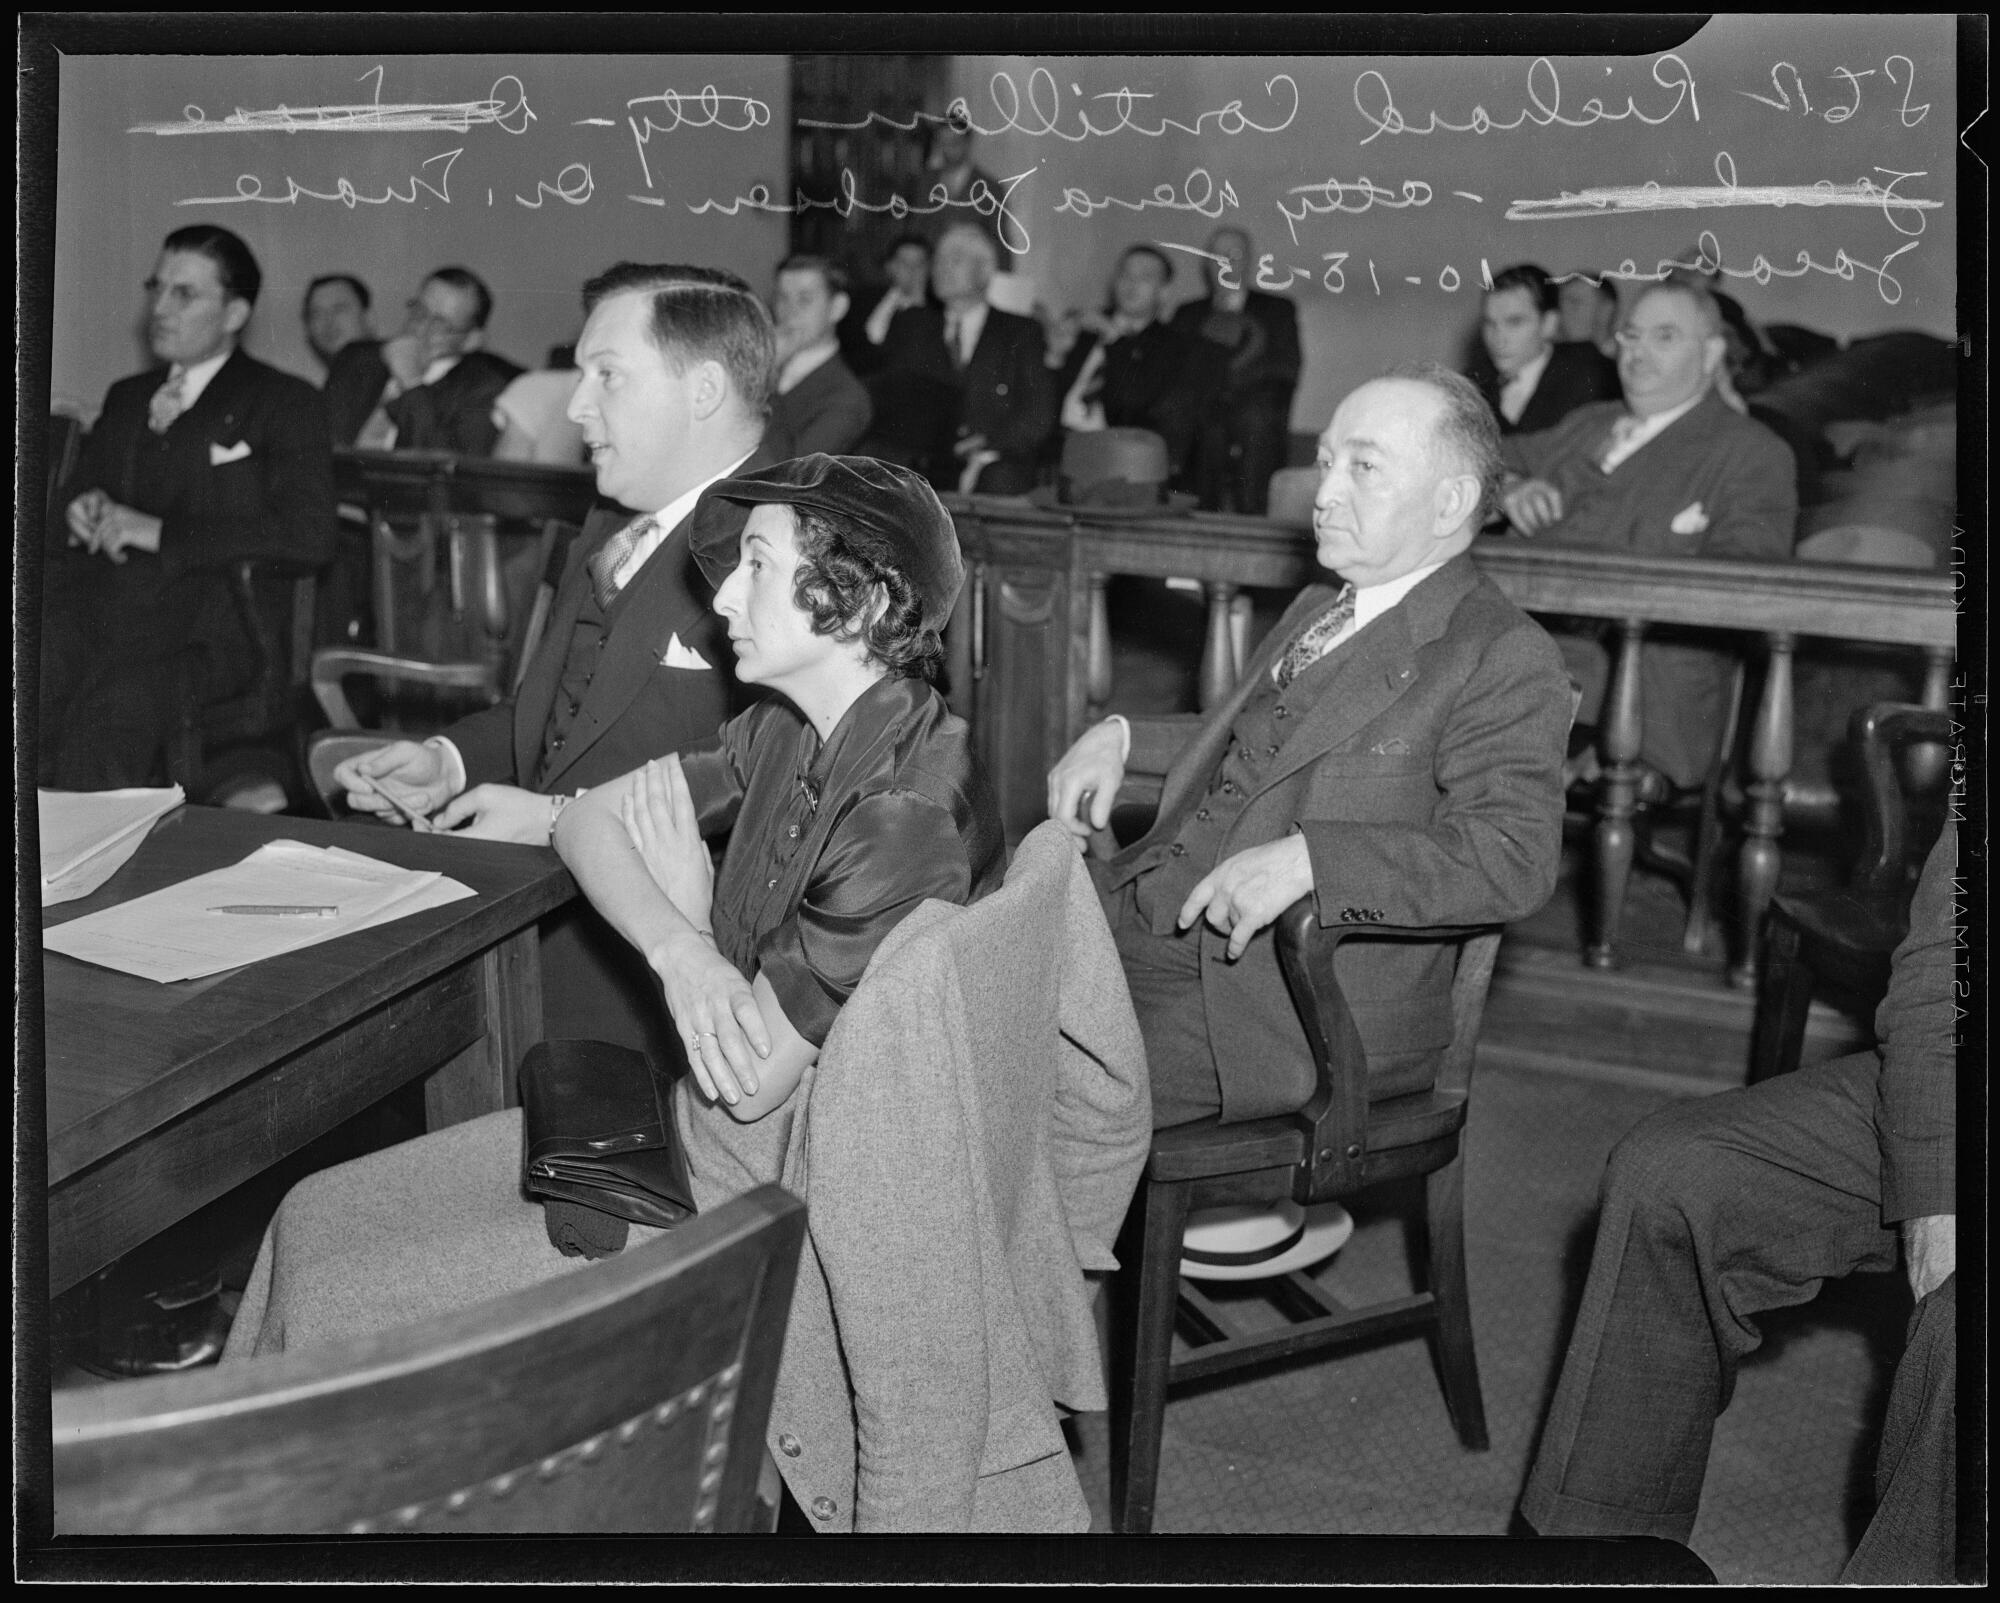 Black and white photo of mostly men but also one woman sitting a courtroom during a legal proceeding.